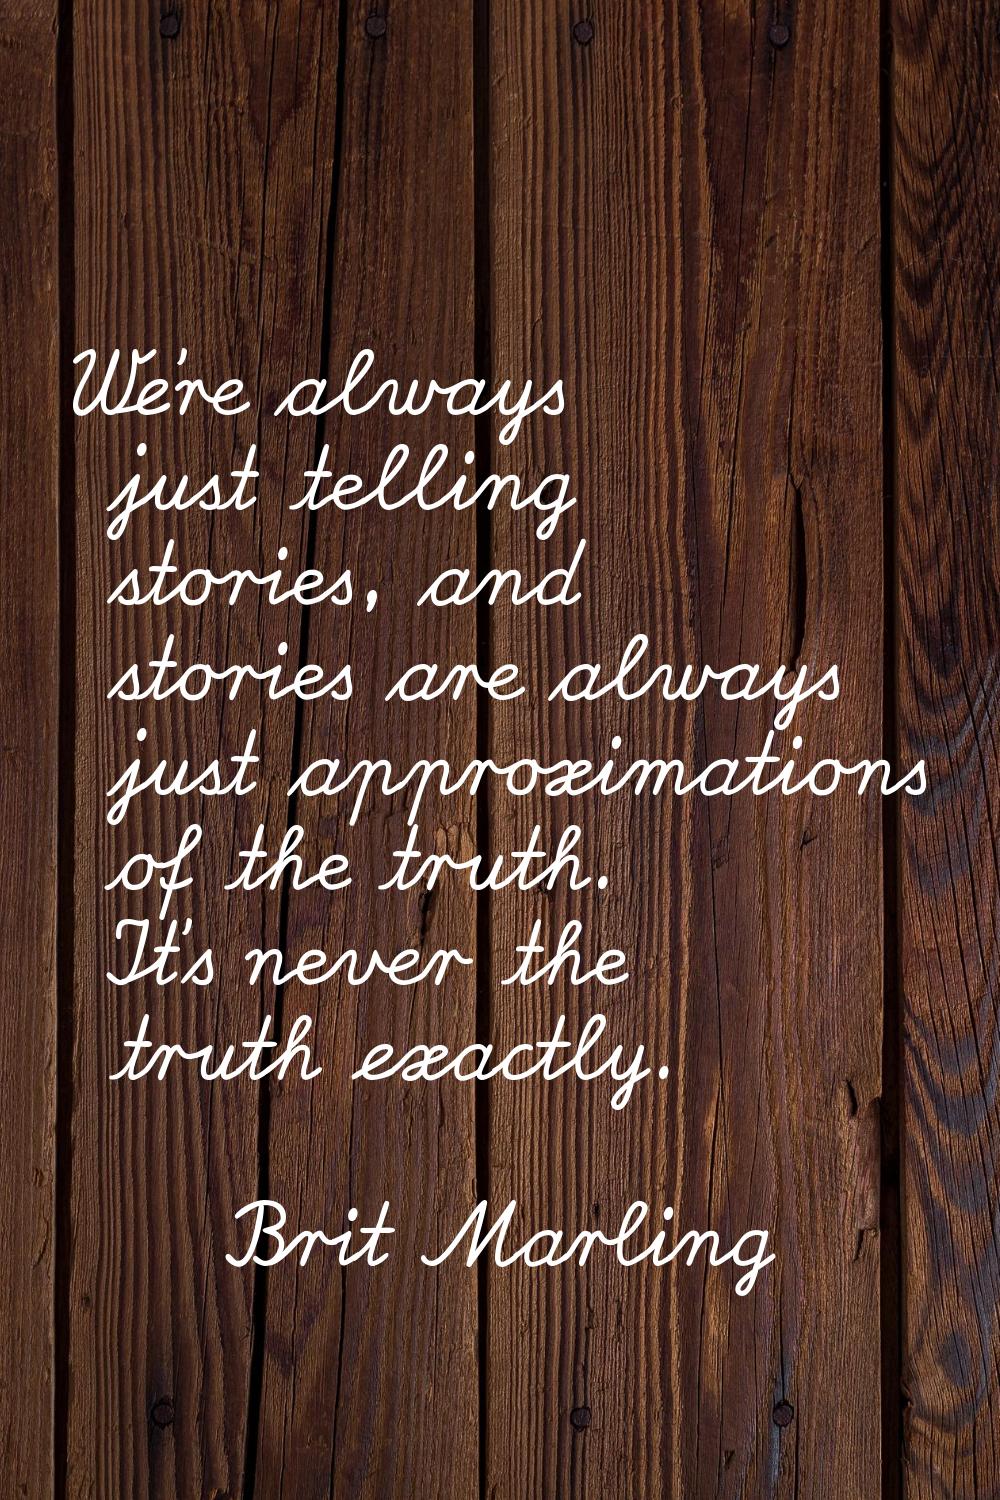 We're always just telling stories, and stories are always just approximations of the truth. It's ne